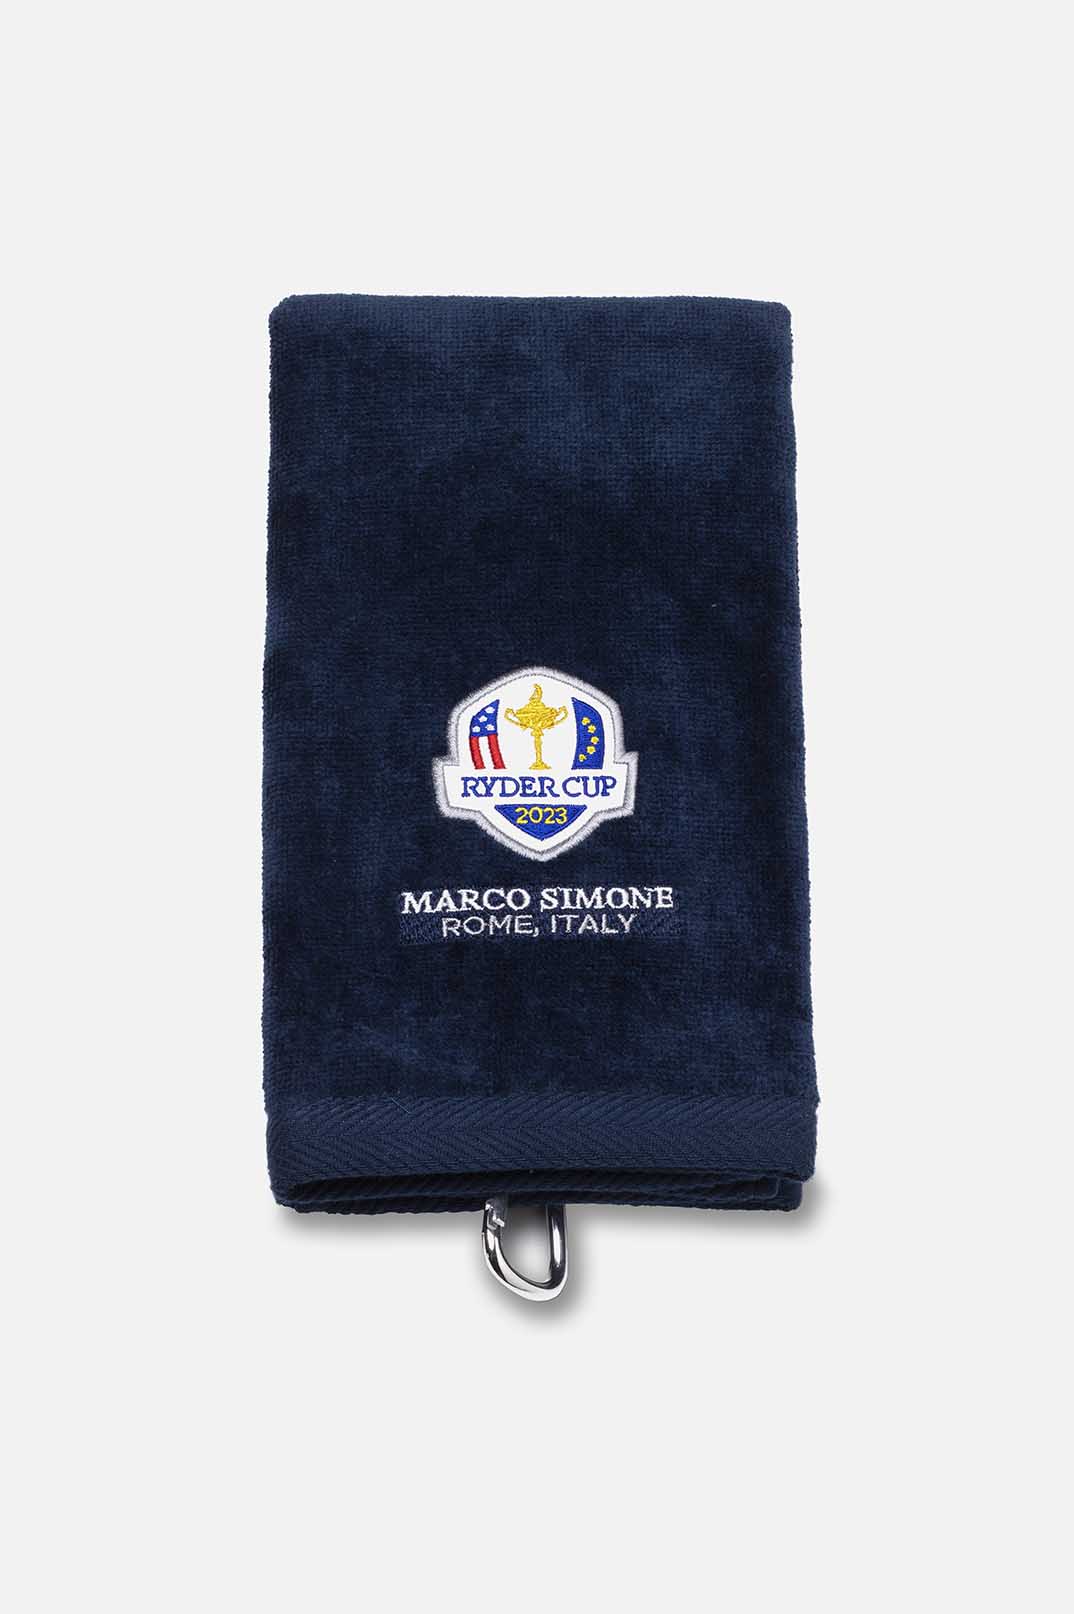 2023 RYDER CUP BLUE NAVY TOWEL - GOLF MARCO SIMONE